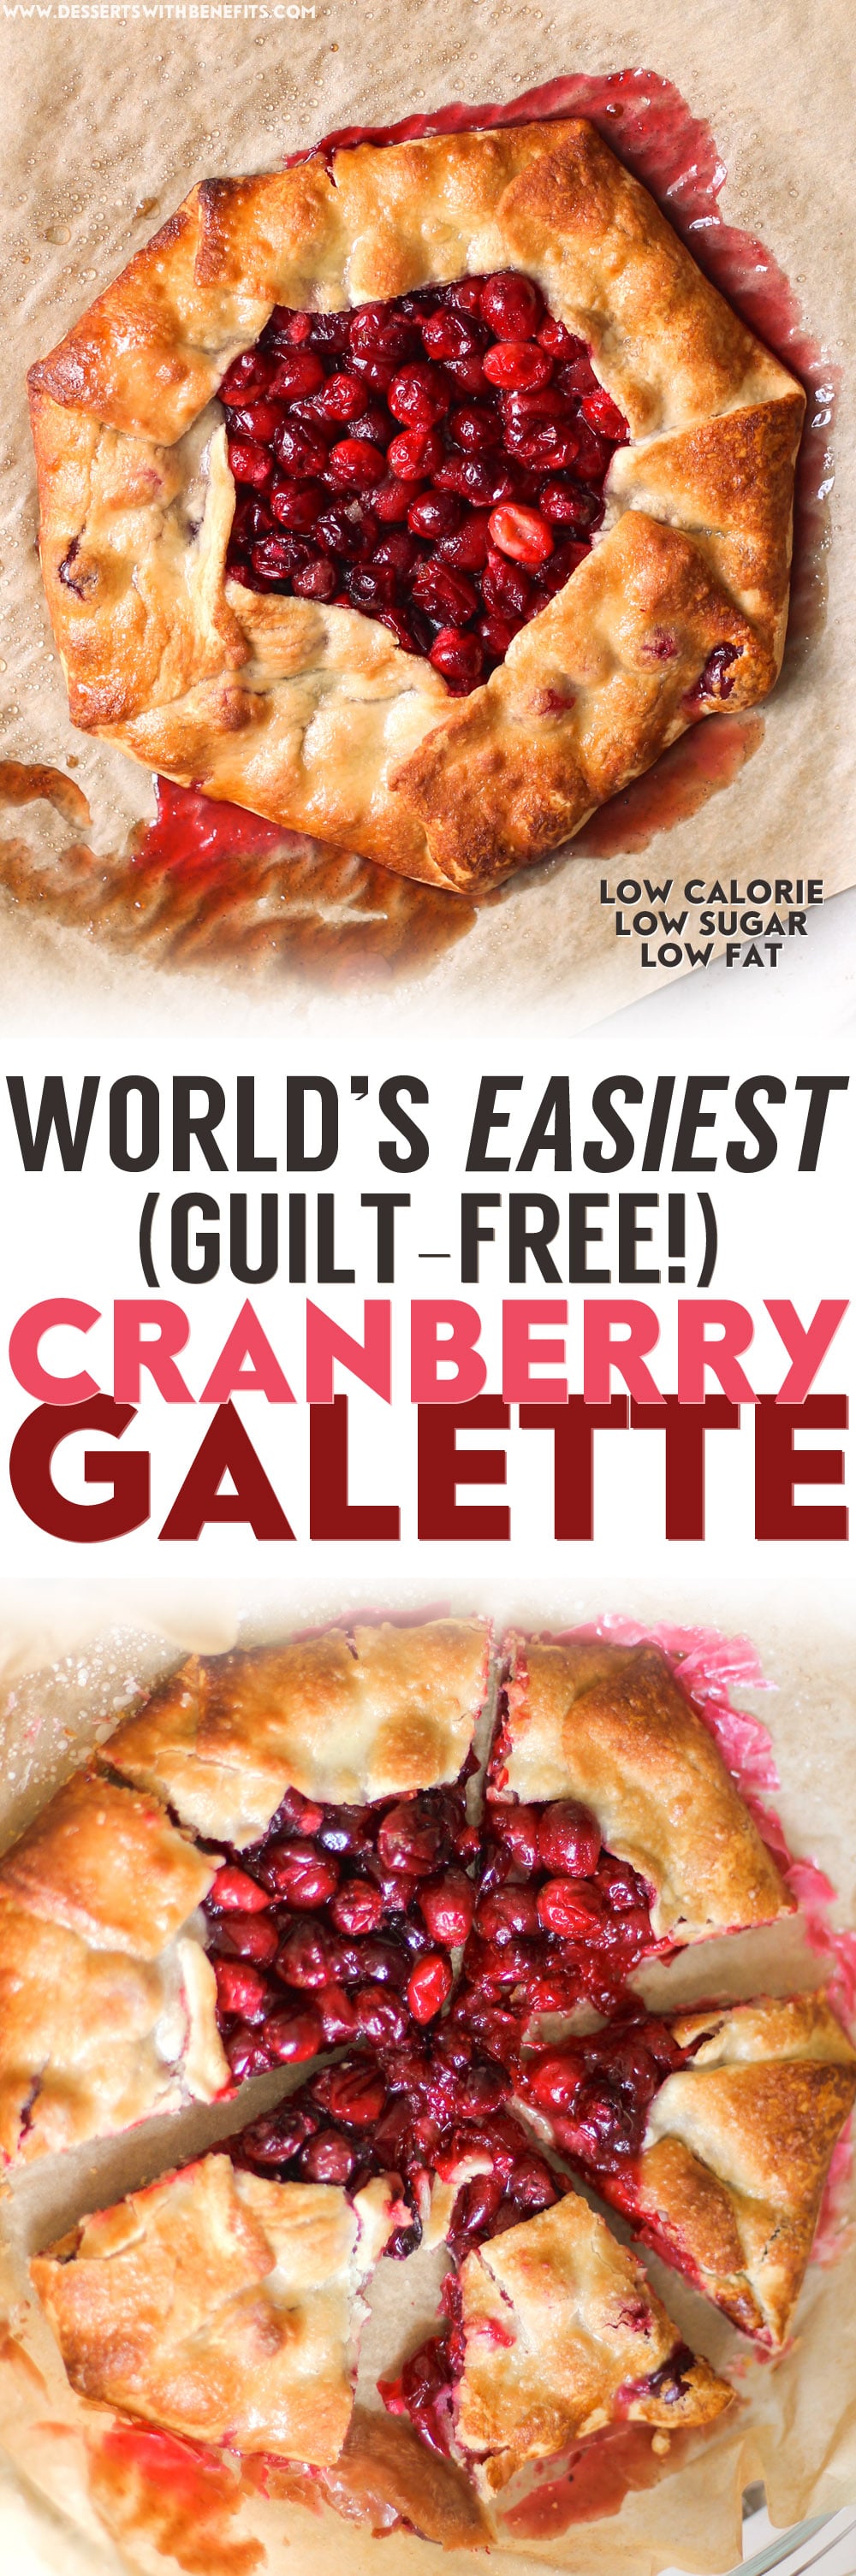 How to Make the World's EASIEST Galette! Quick and Lazy Guilt-Free Cranberry Galette (low calorie, low fat, low sugar) - Healthy Dessert Recipes at Desserts with Benefits